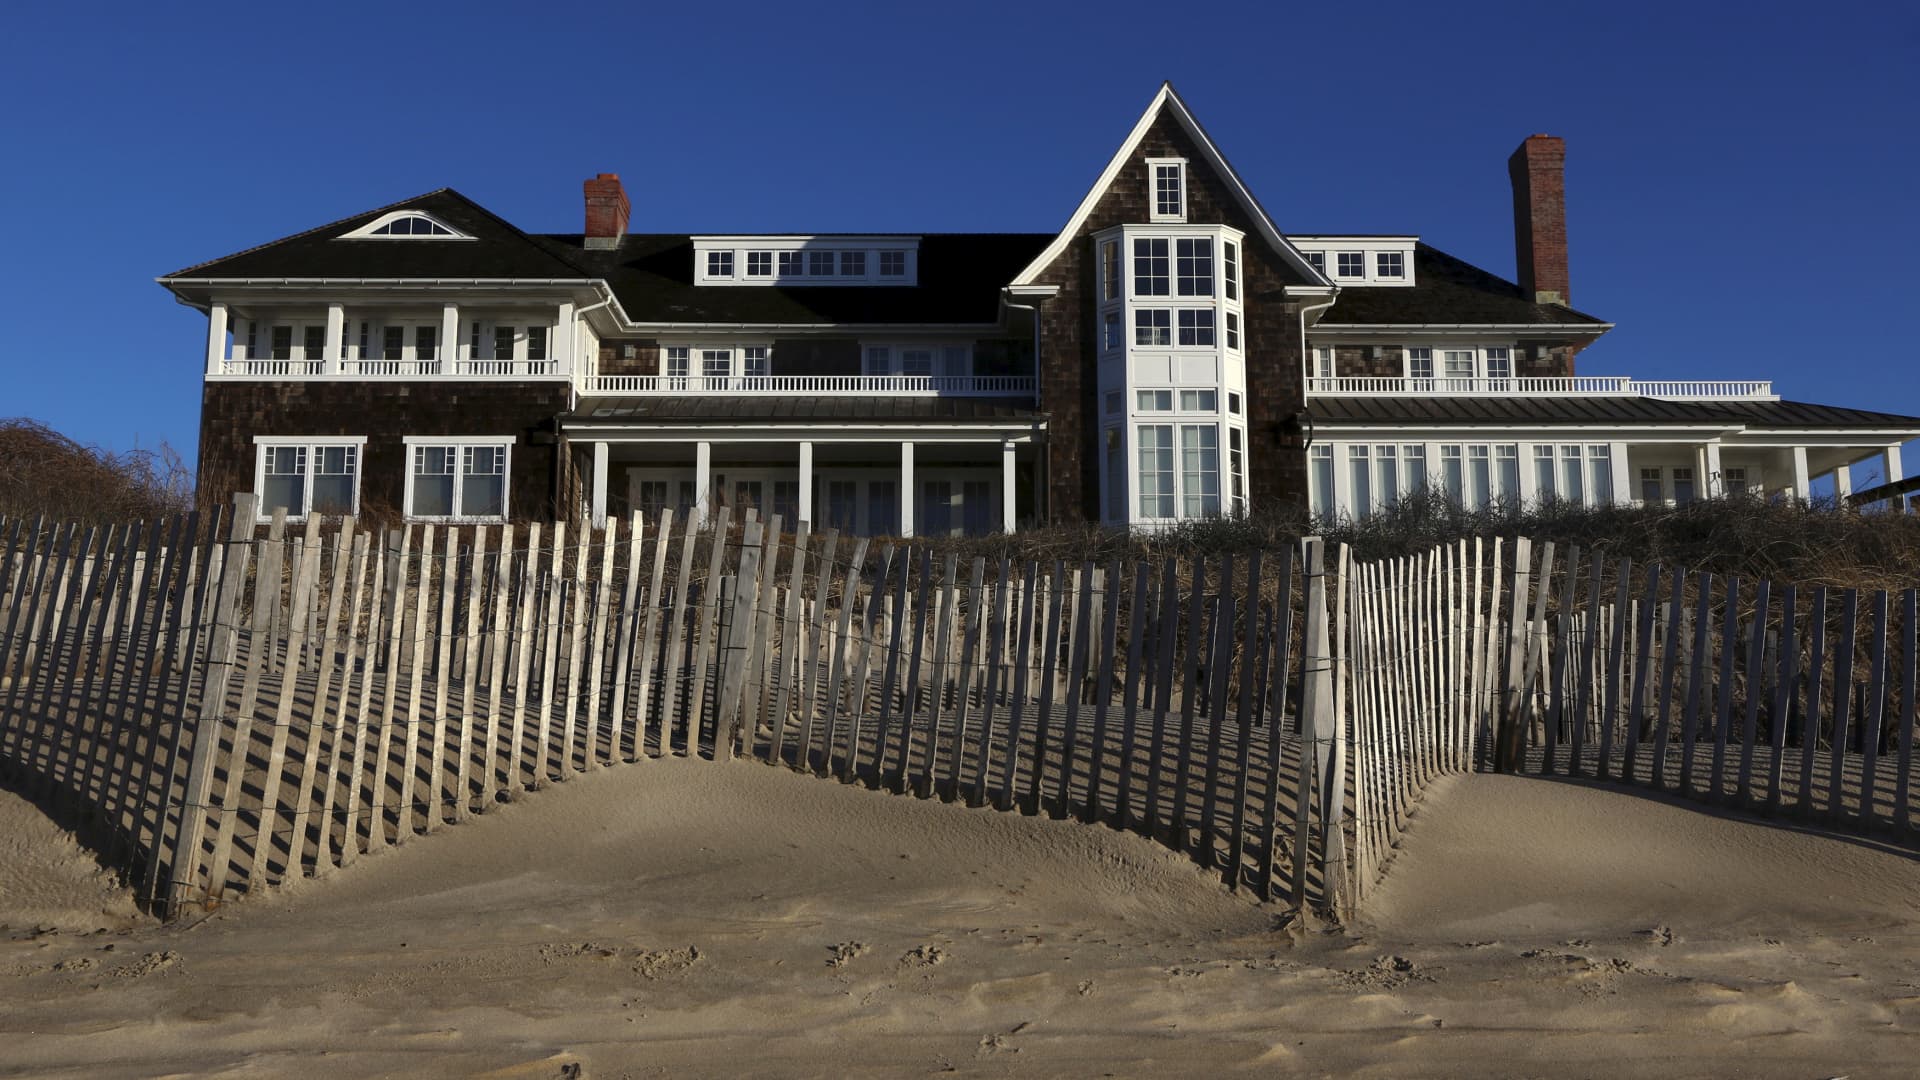 The average price for a house in the Hamptons just hit a record $3 million